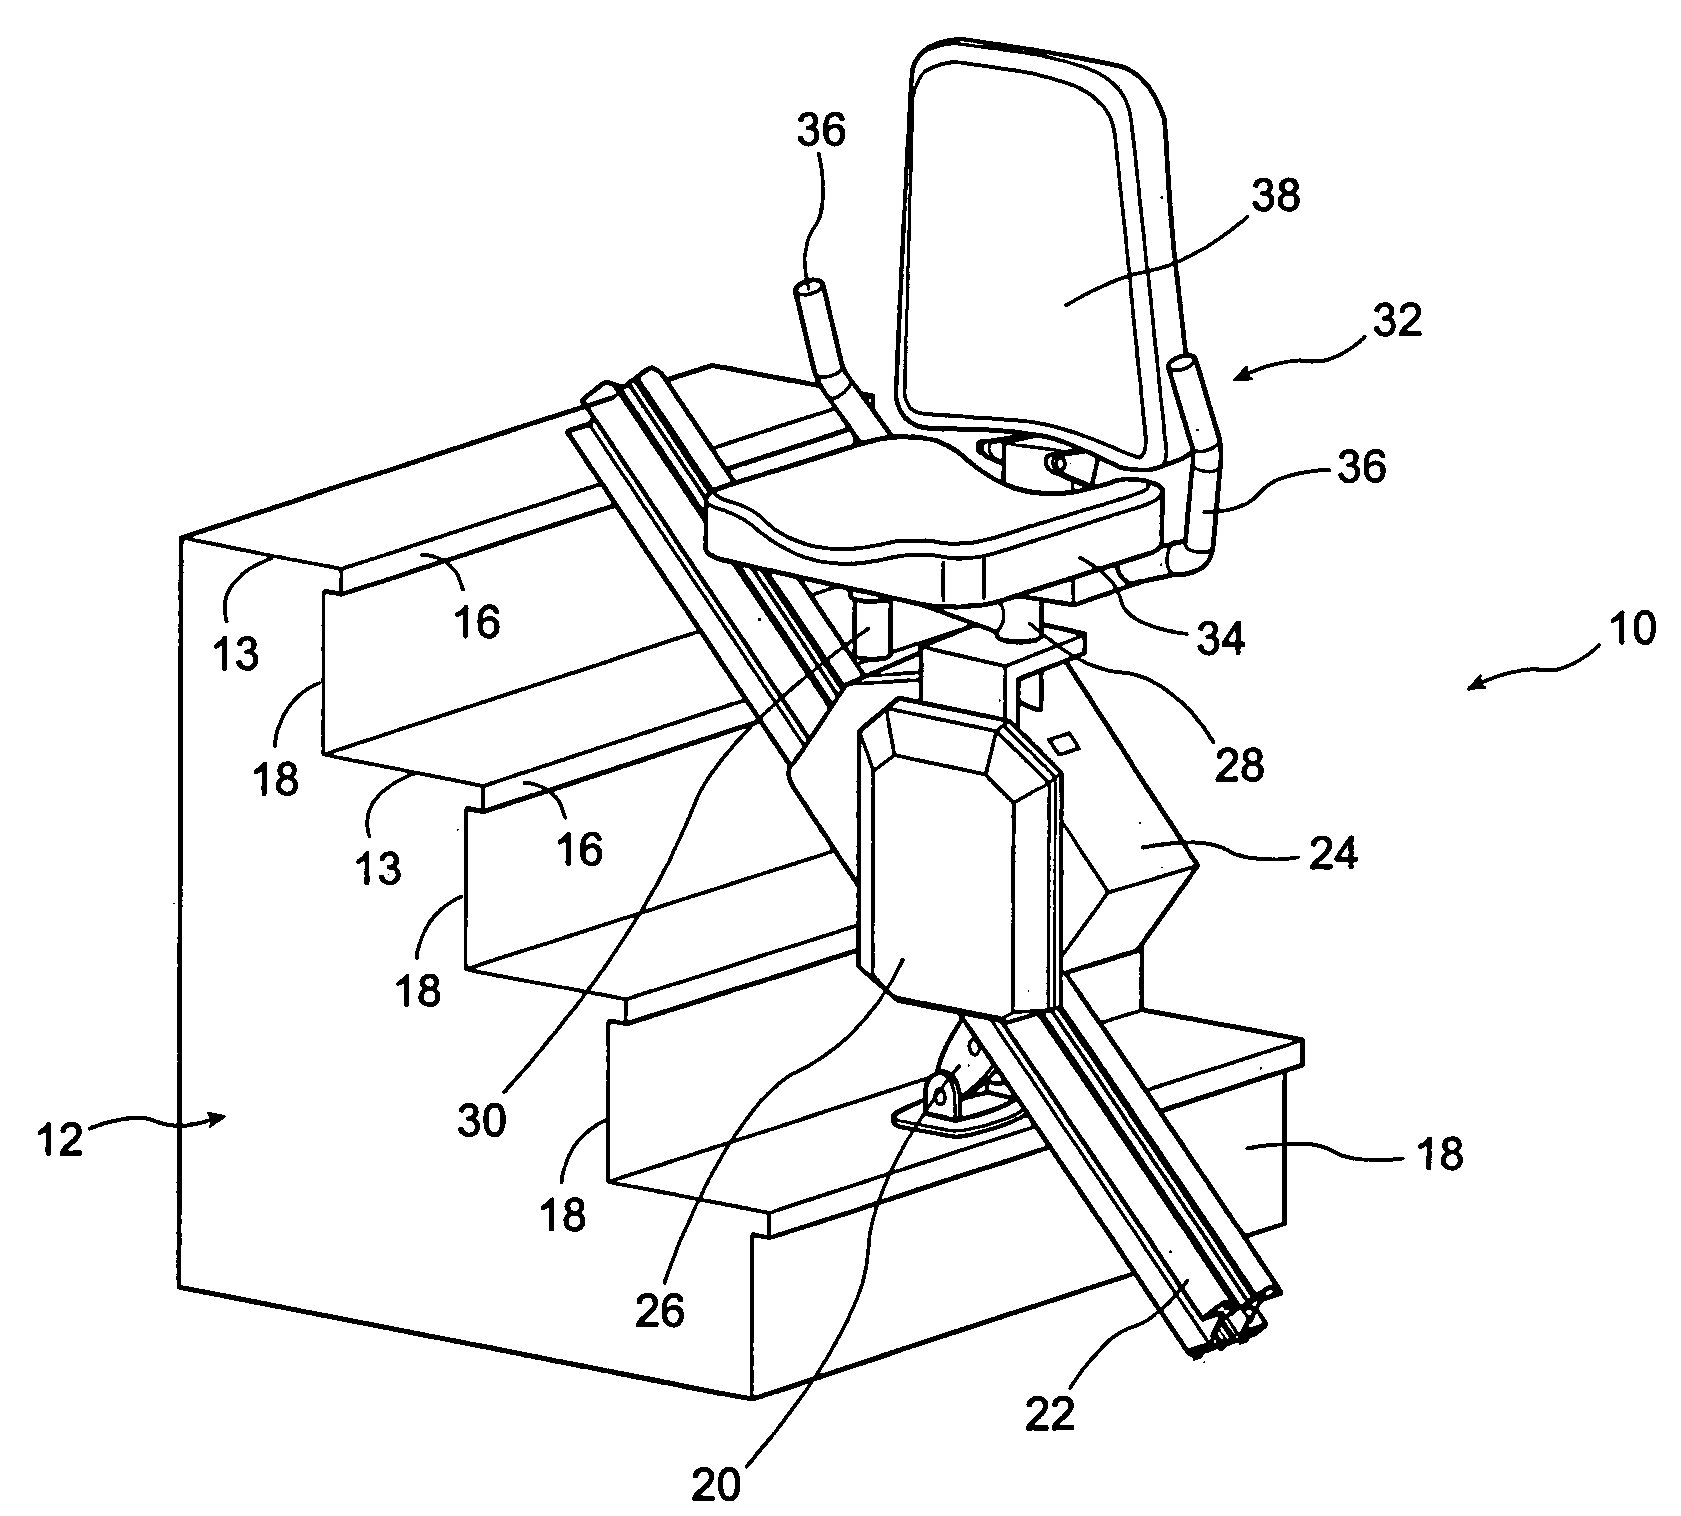 Stair lift device